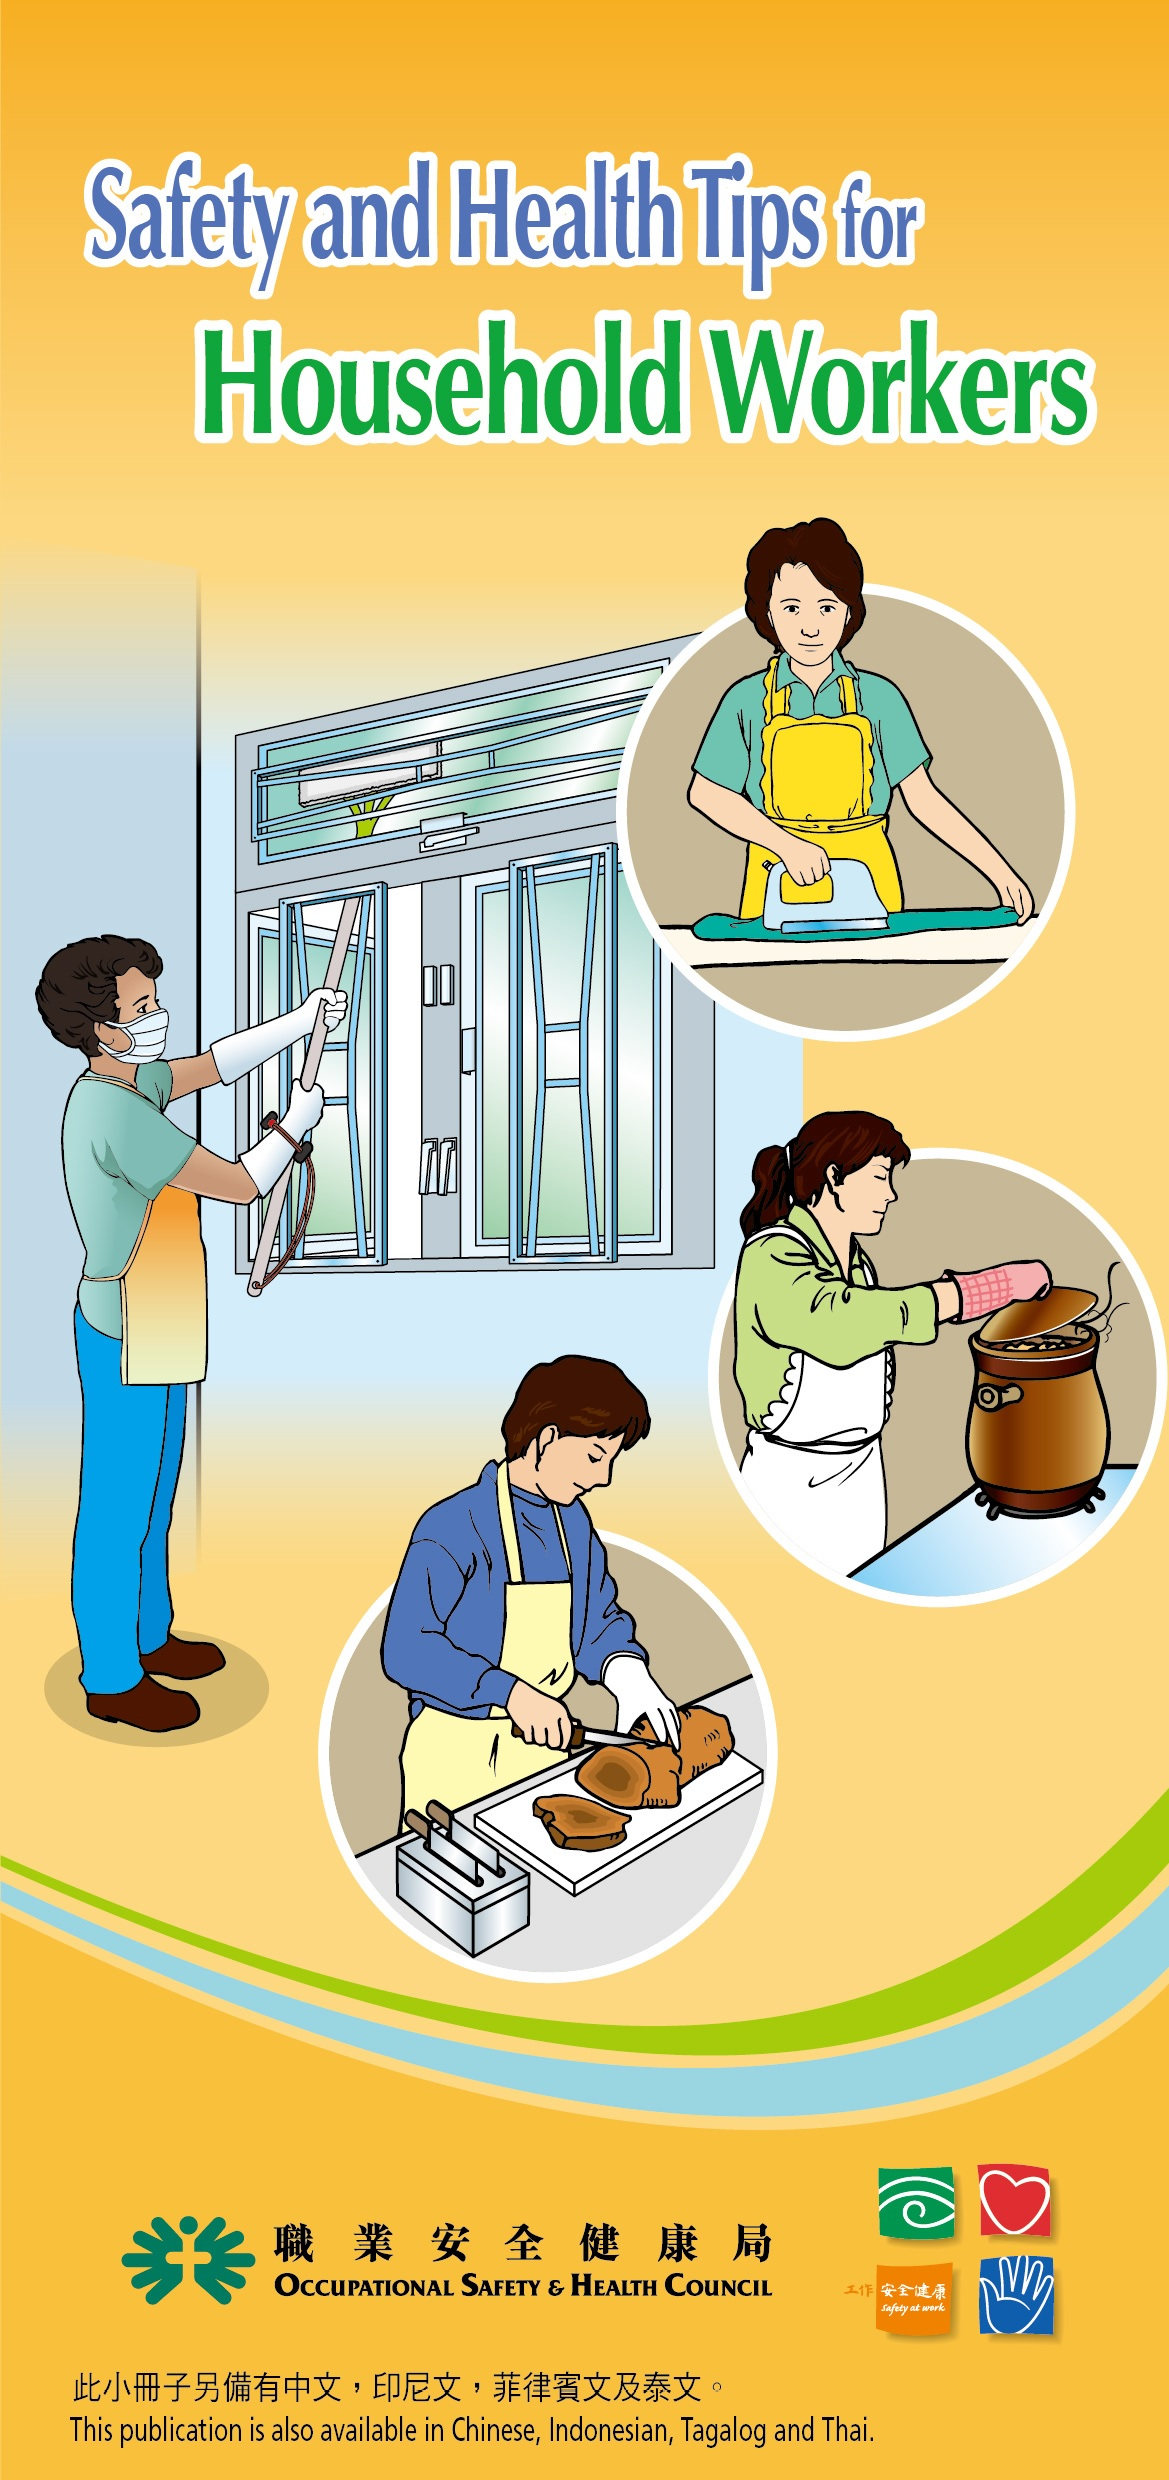 Safety and Health Tips for Household Workers